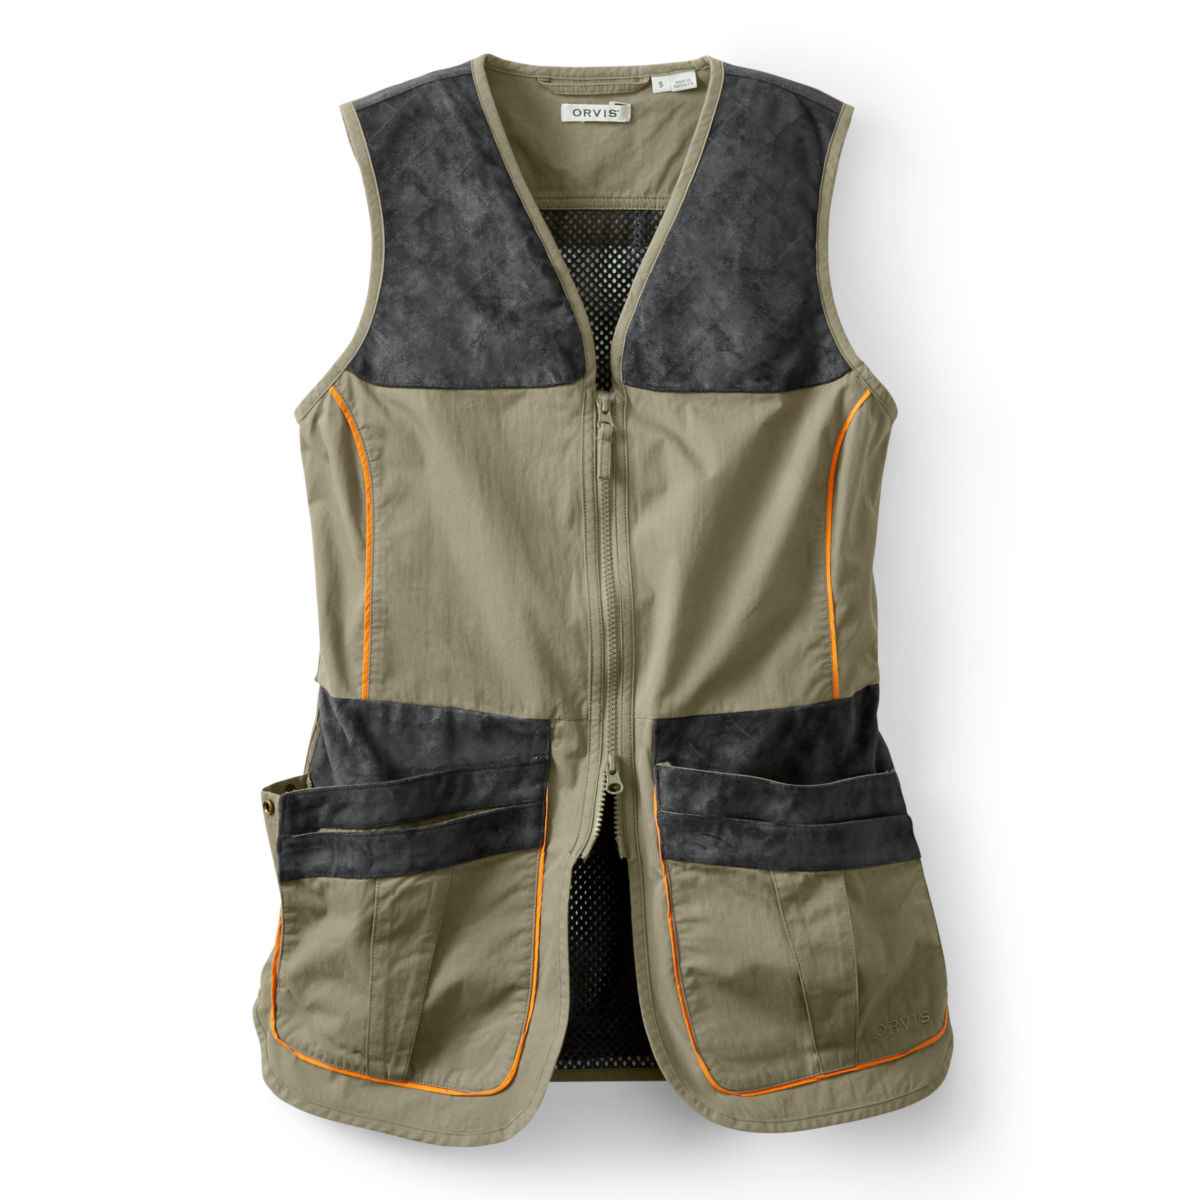 Shooting vest women 100500 about forex